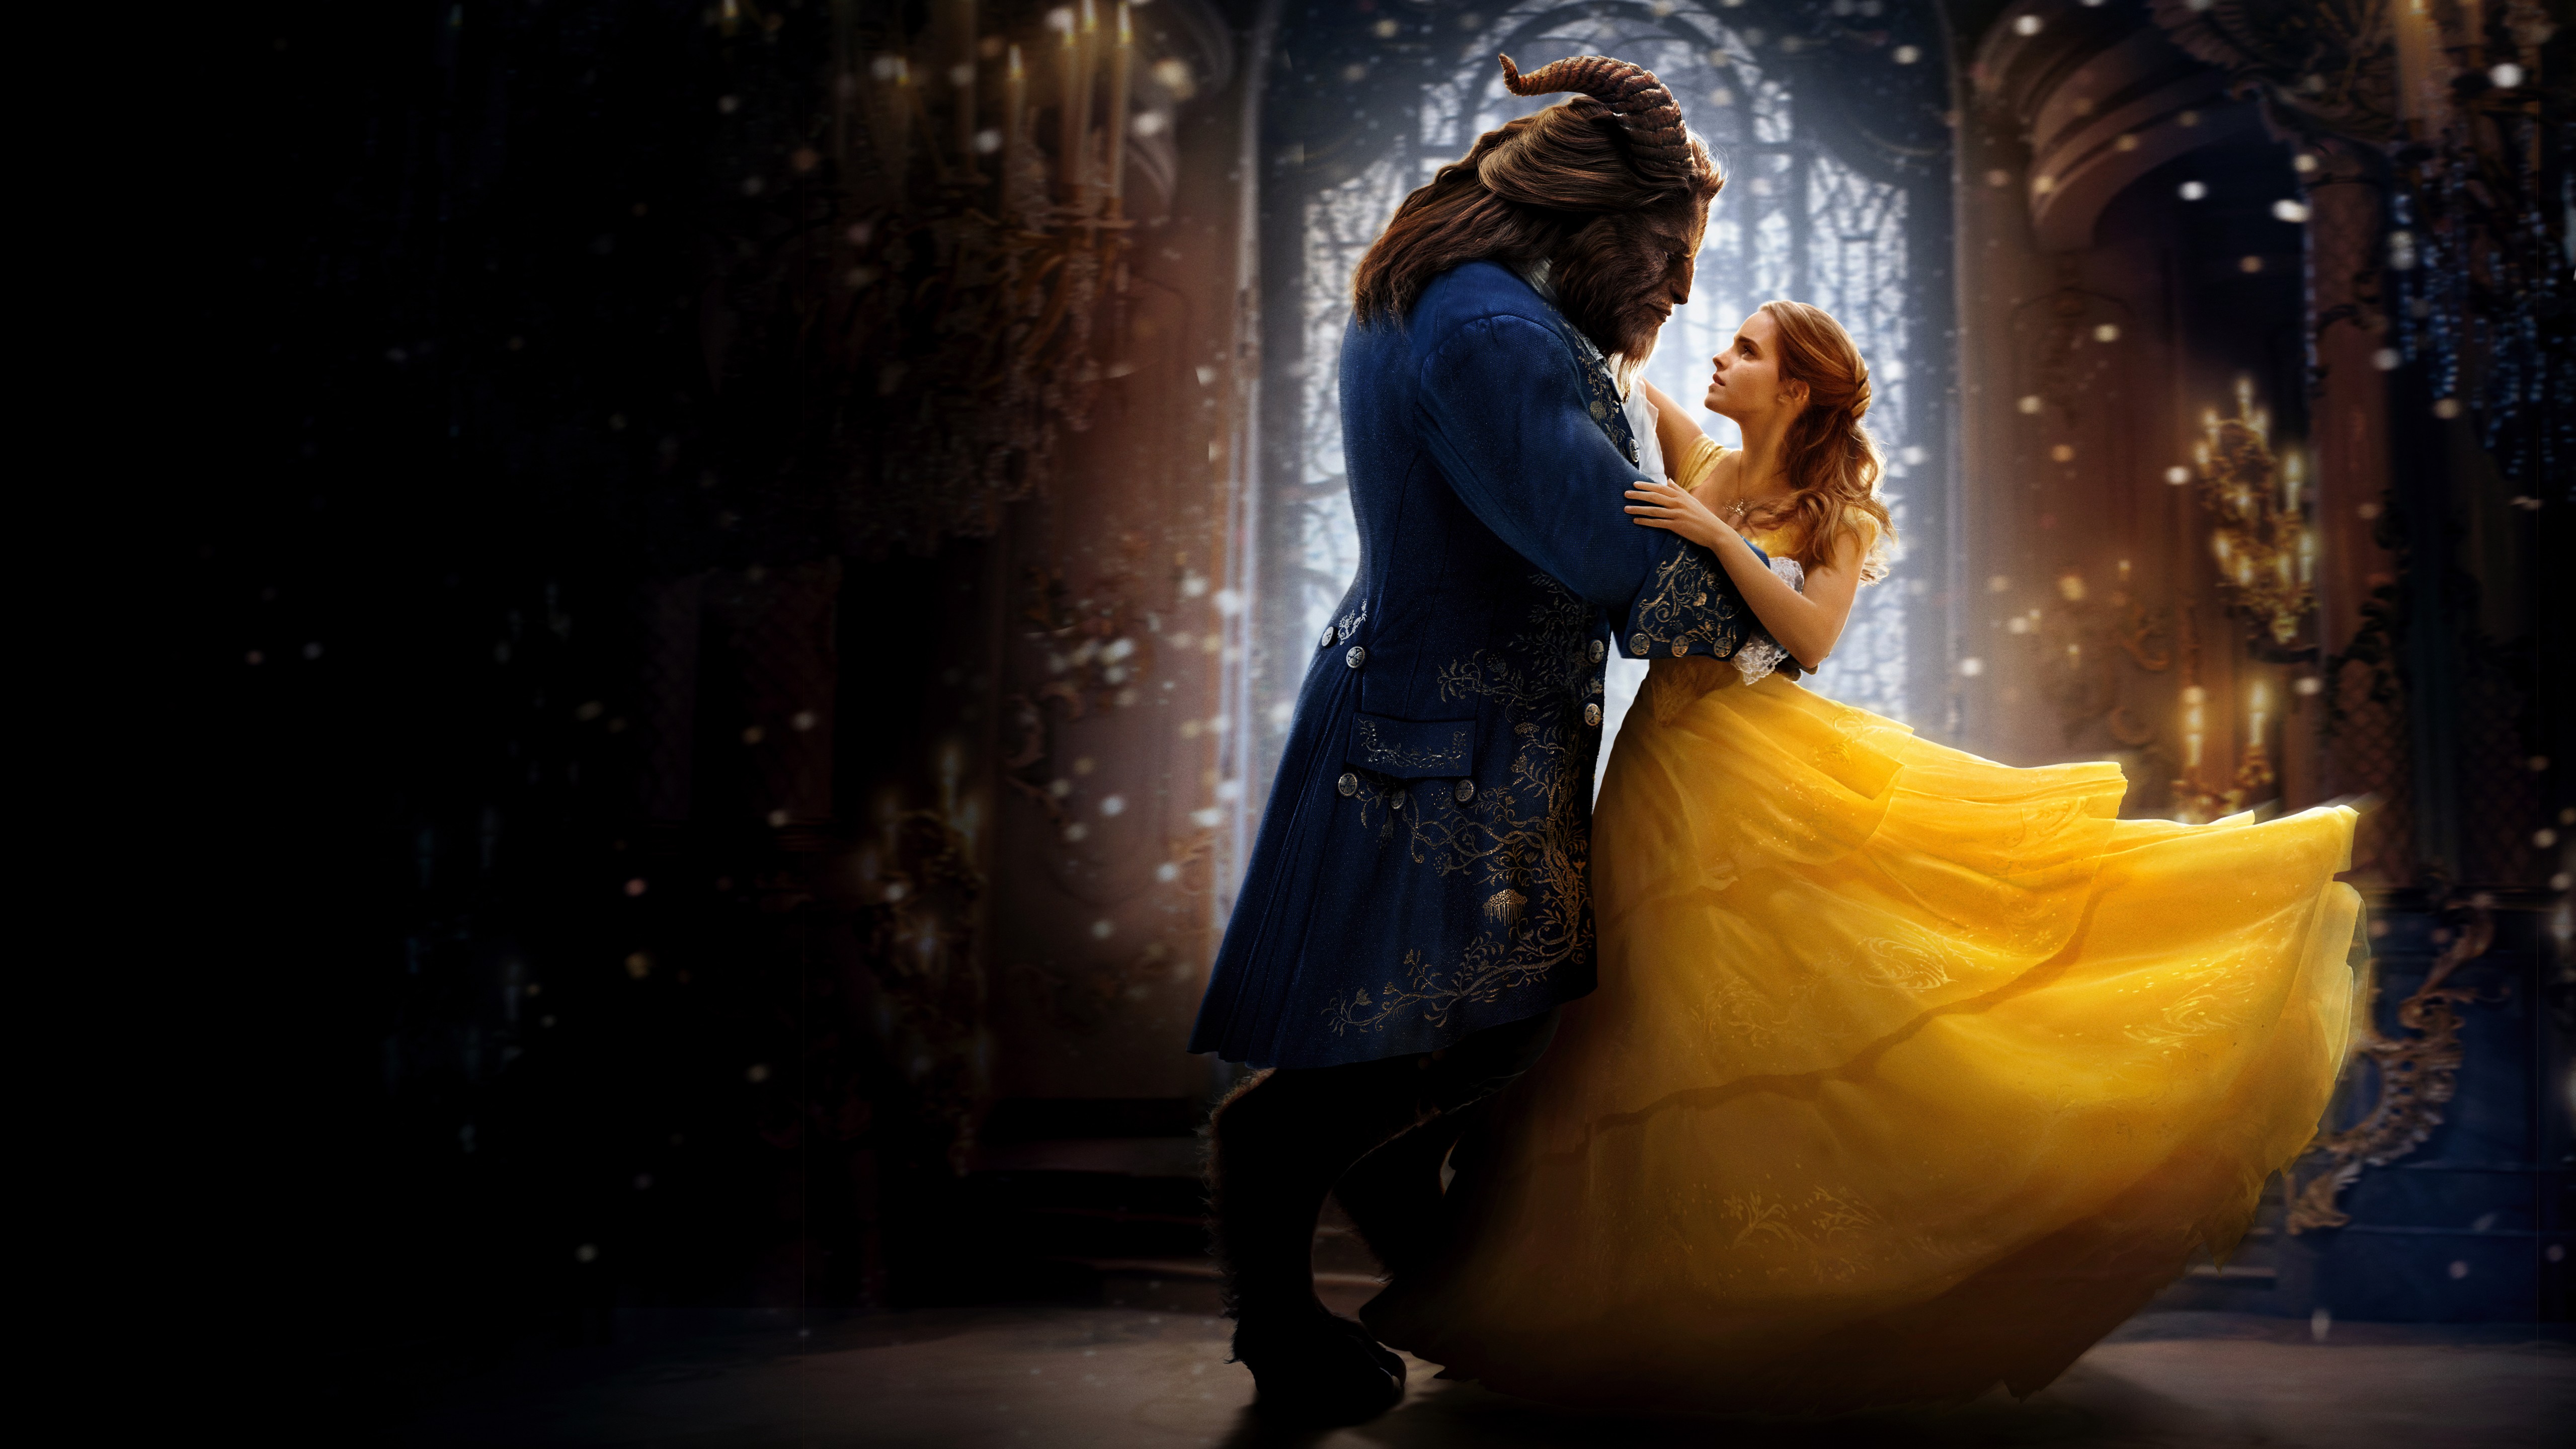 Movie Beauty And The Beast (2017) HD Wallpaper | Background Image